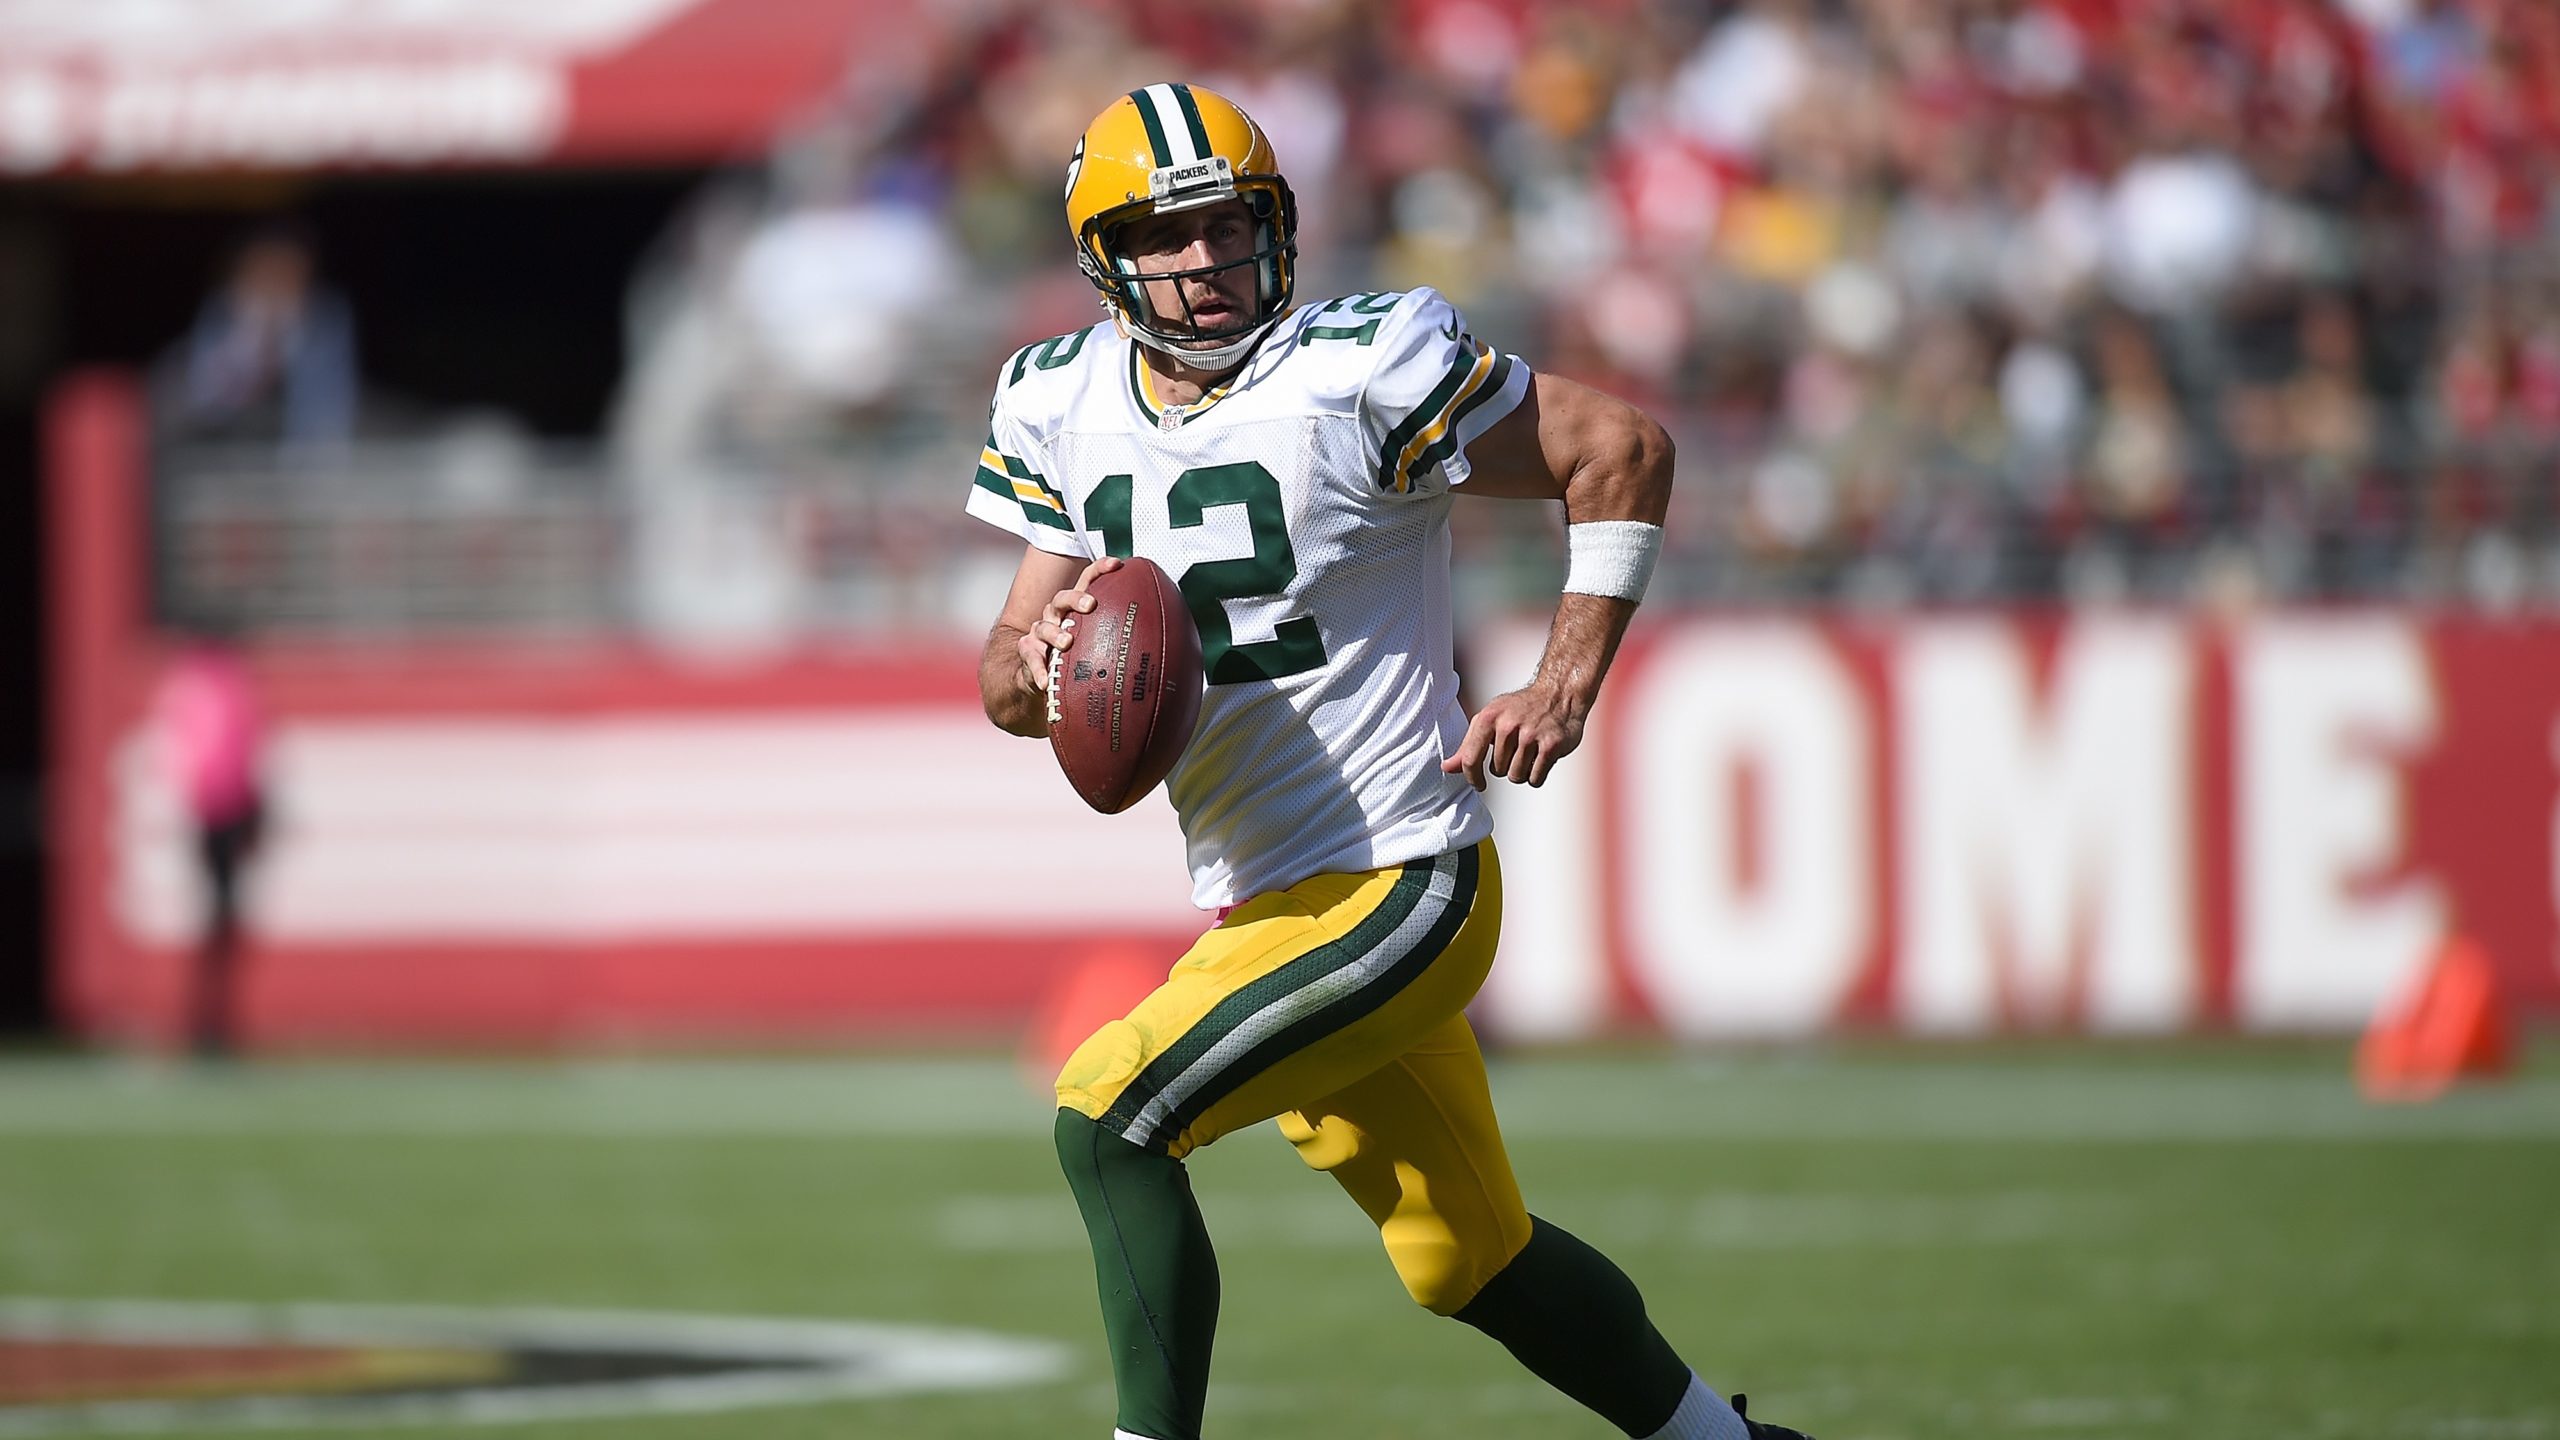 Packers-49ers game Nov. 24 flexed to Sunday Night Football